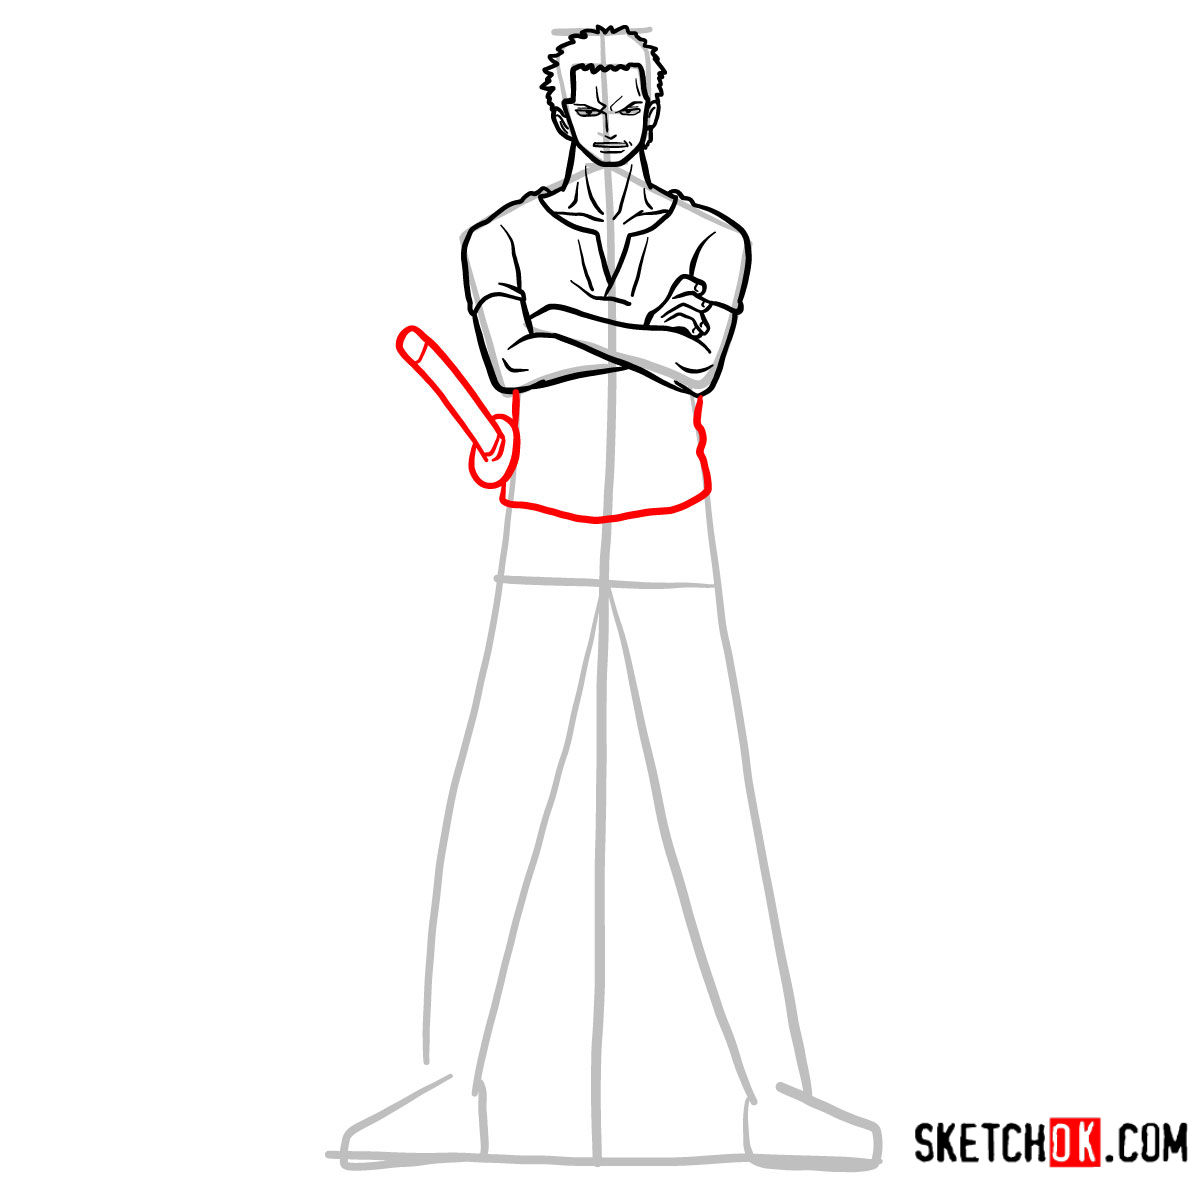 How To Draw Roronoa Zoro Full Growth One Piece Sketchok Easy Drawing Guides